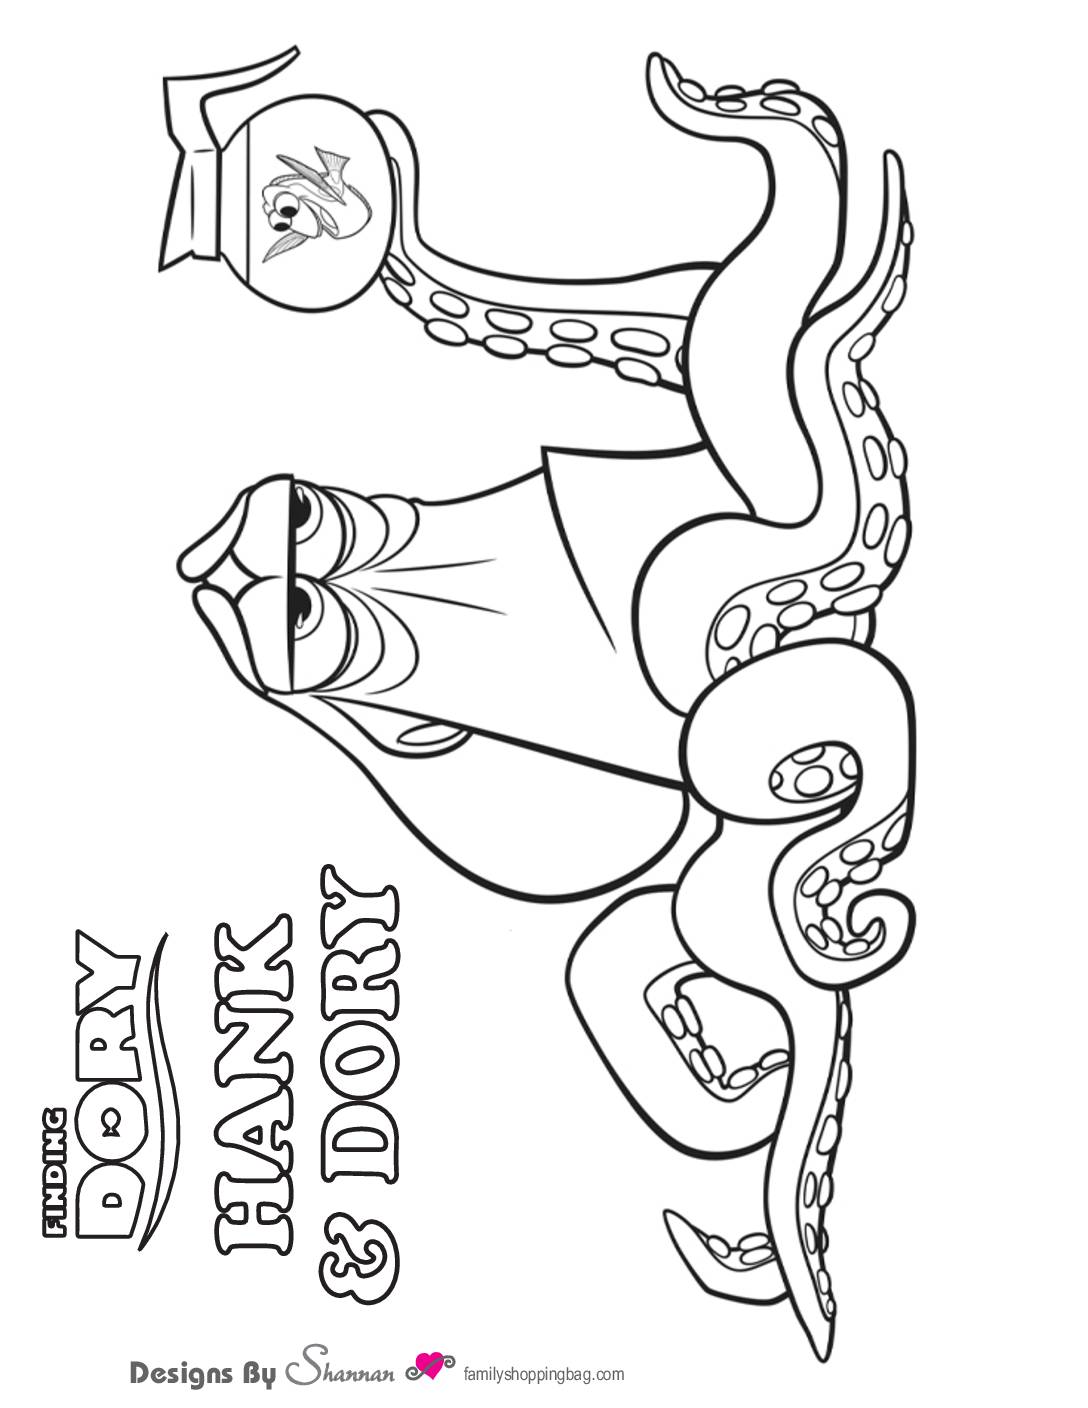 Coloring Page6